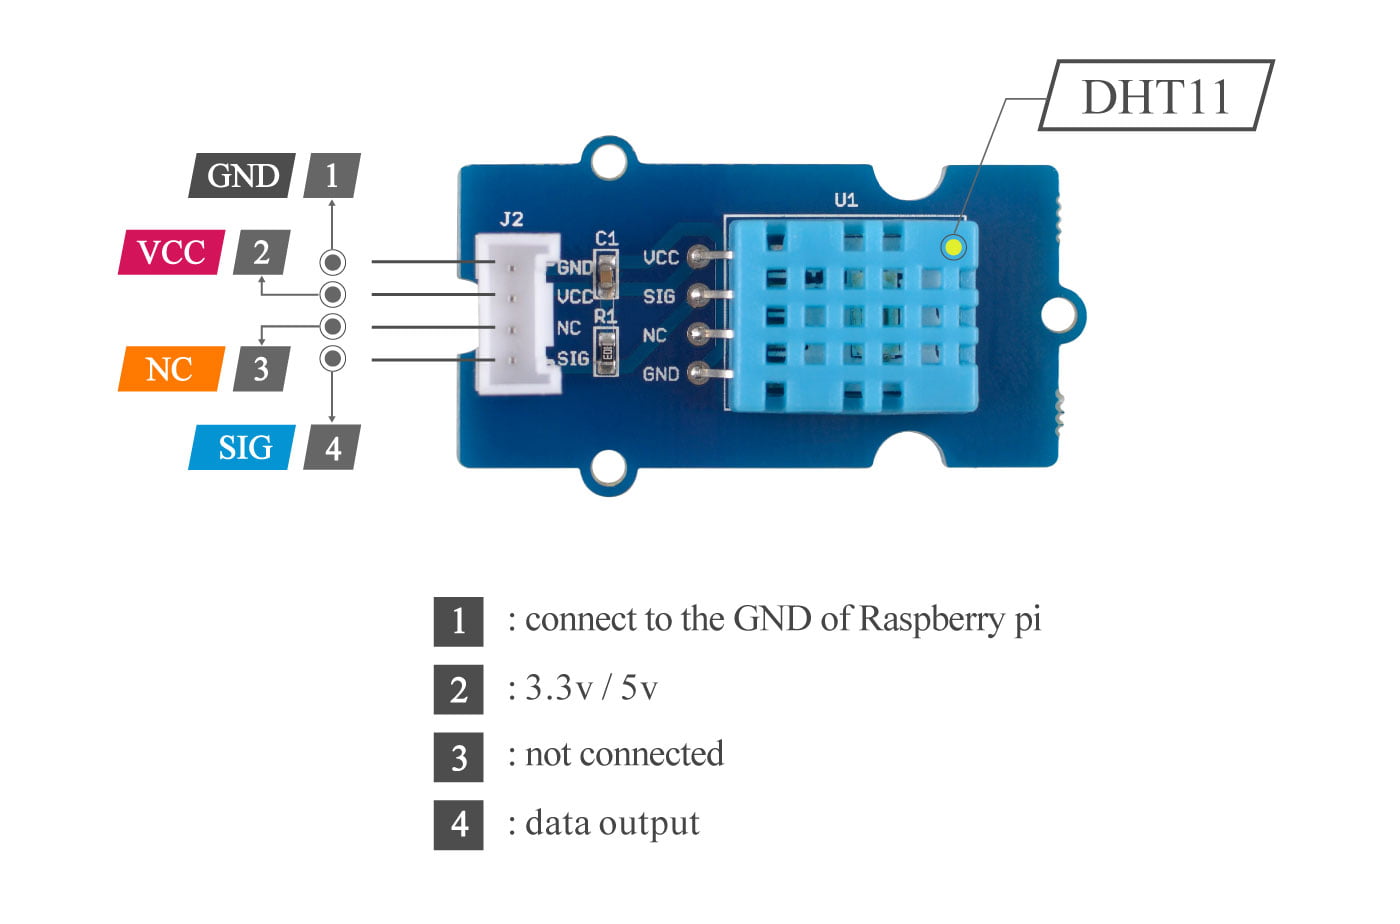 https://simple-circuit.com/wp-content/uploads/2019/07/grove-dht11-board-pinout.jpg